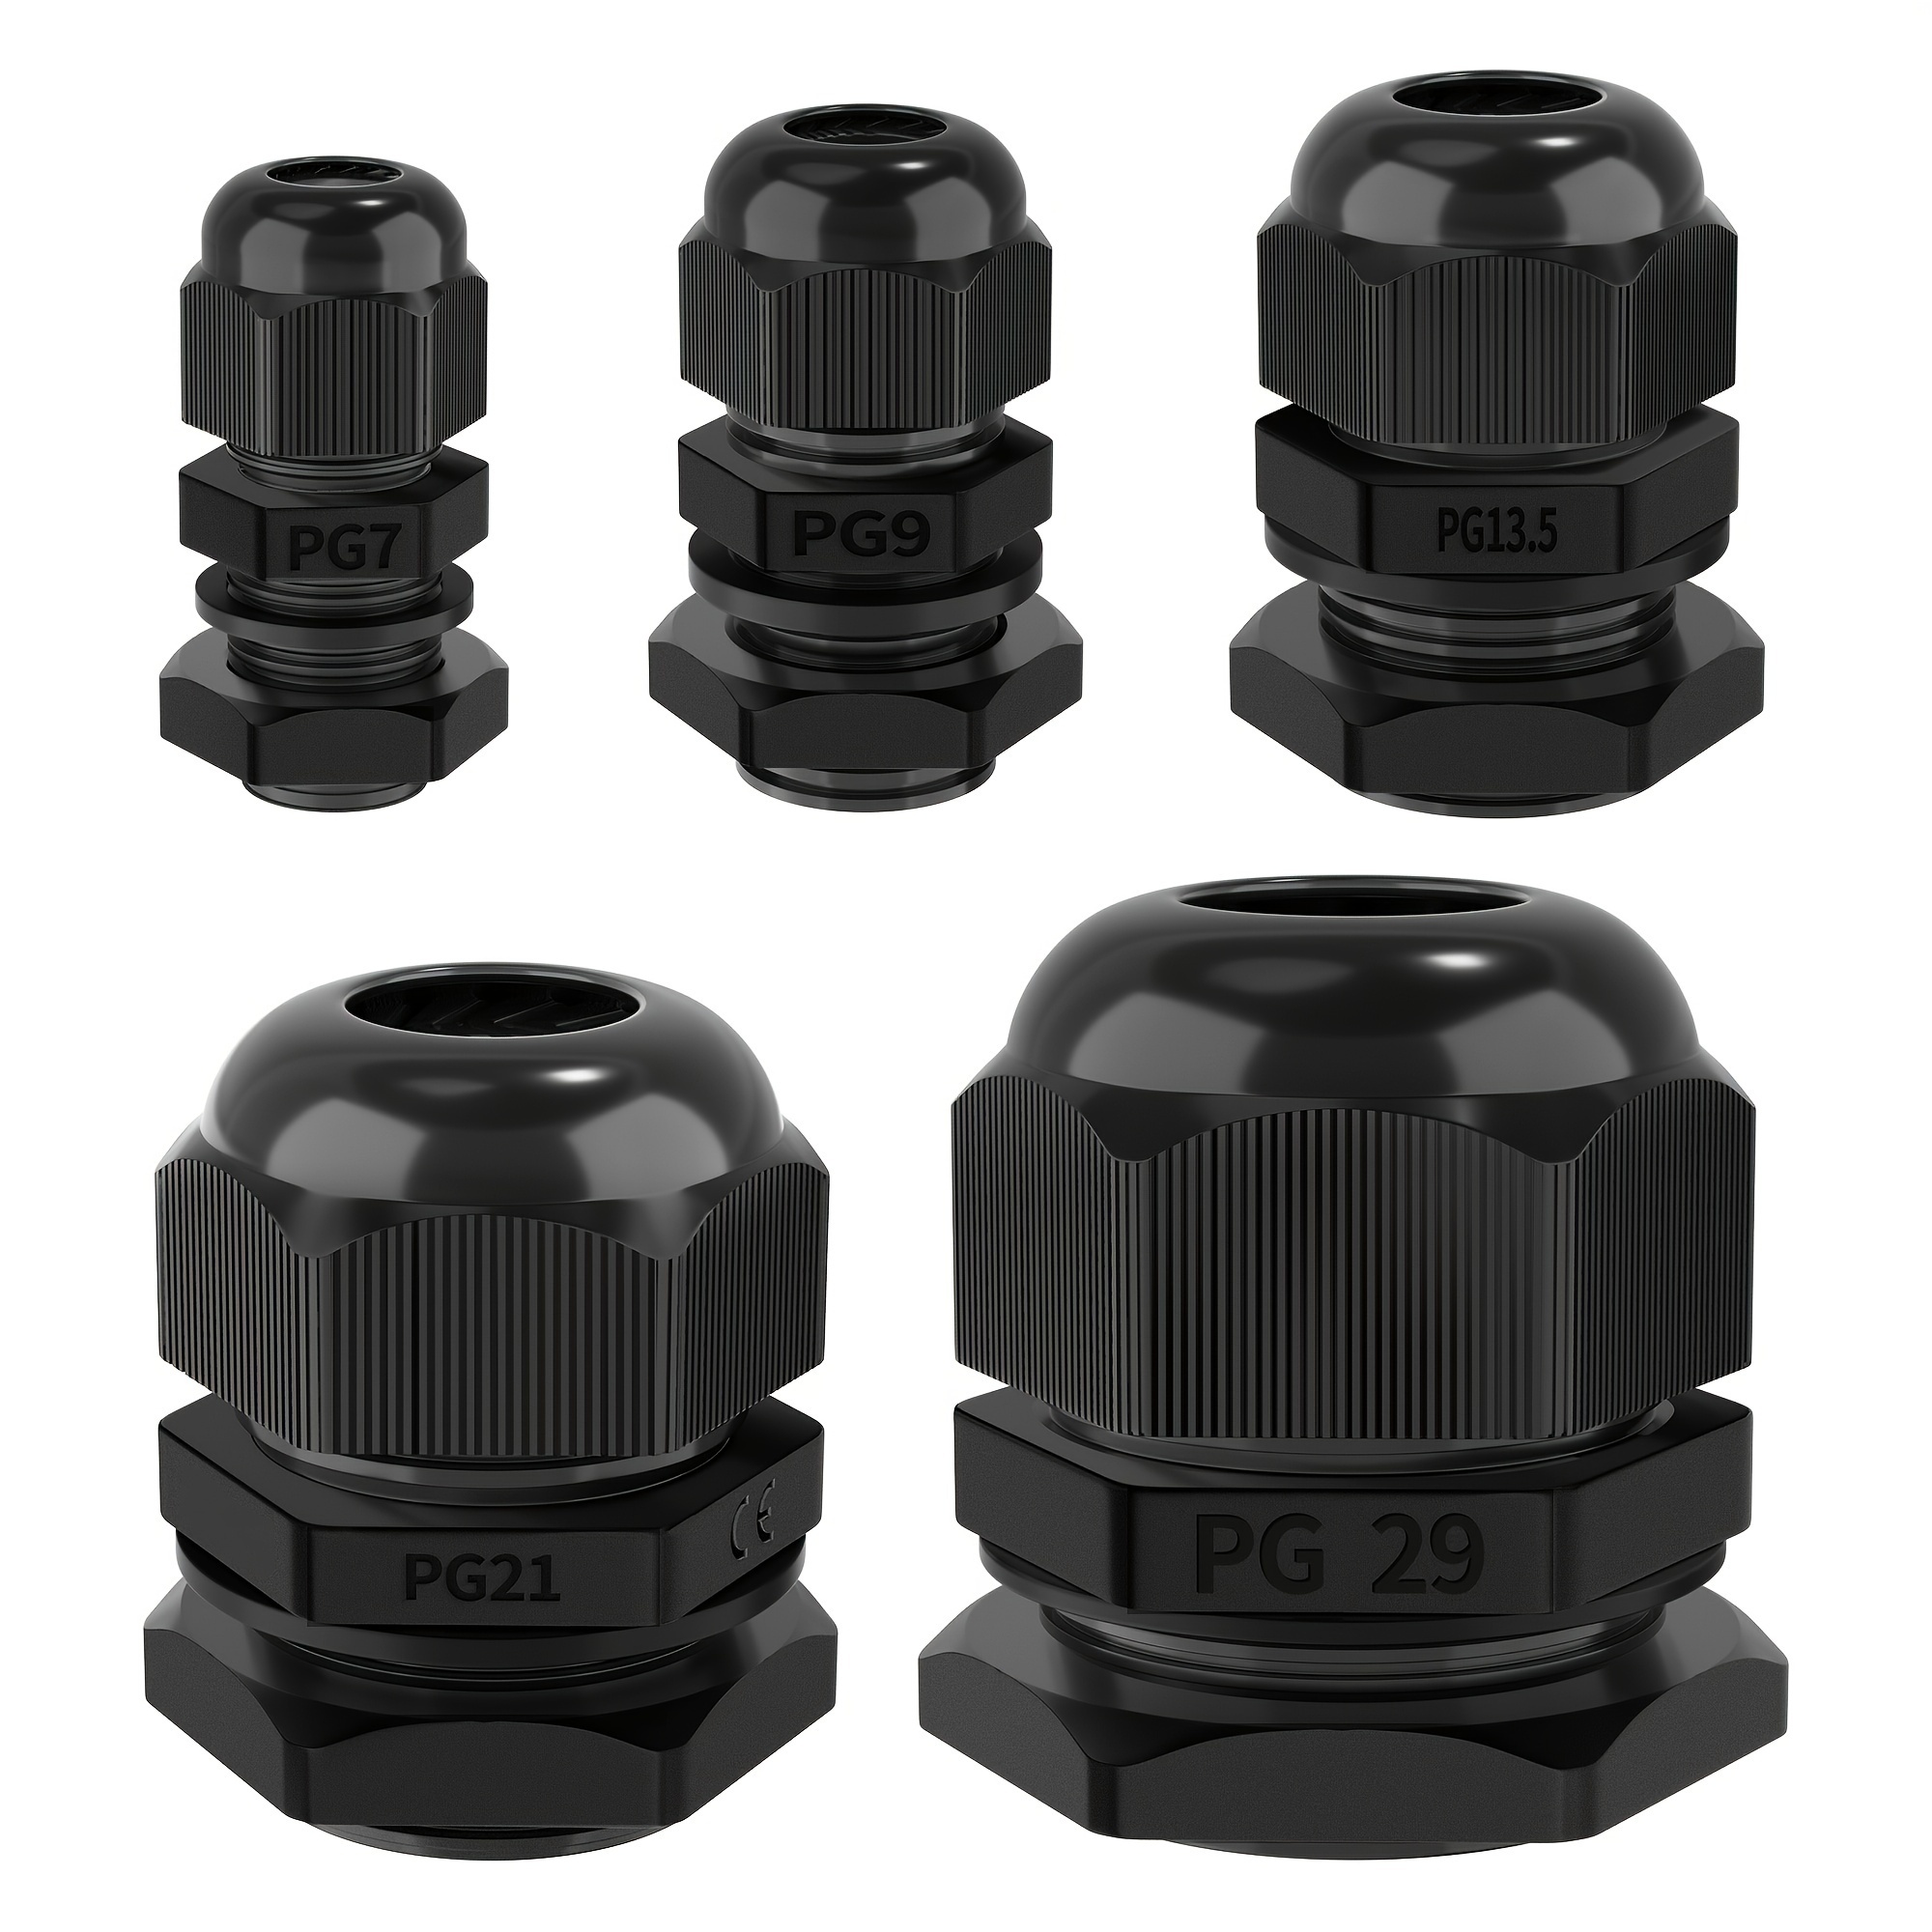 

72pcs Black Color Cable Glands Strain Relief Cord Connector, Grip Cable Pass Through Pg7 1/4" 3/8" 1/2" 3/4" 1" Cable Glands For 3-25mm Cable Diameter